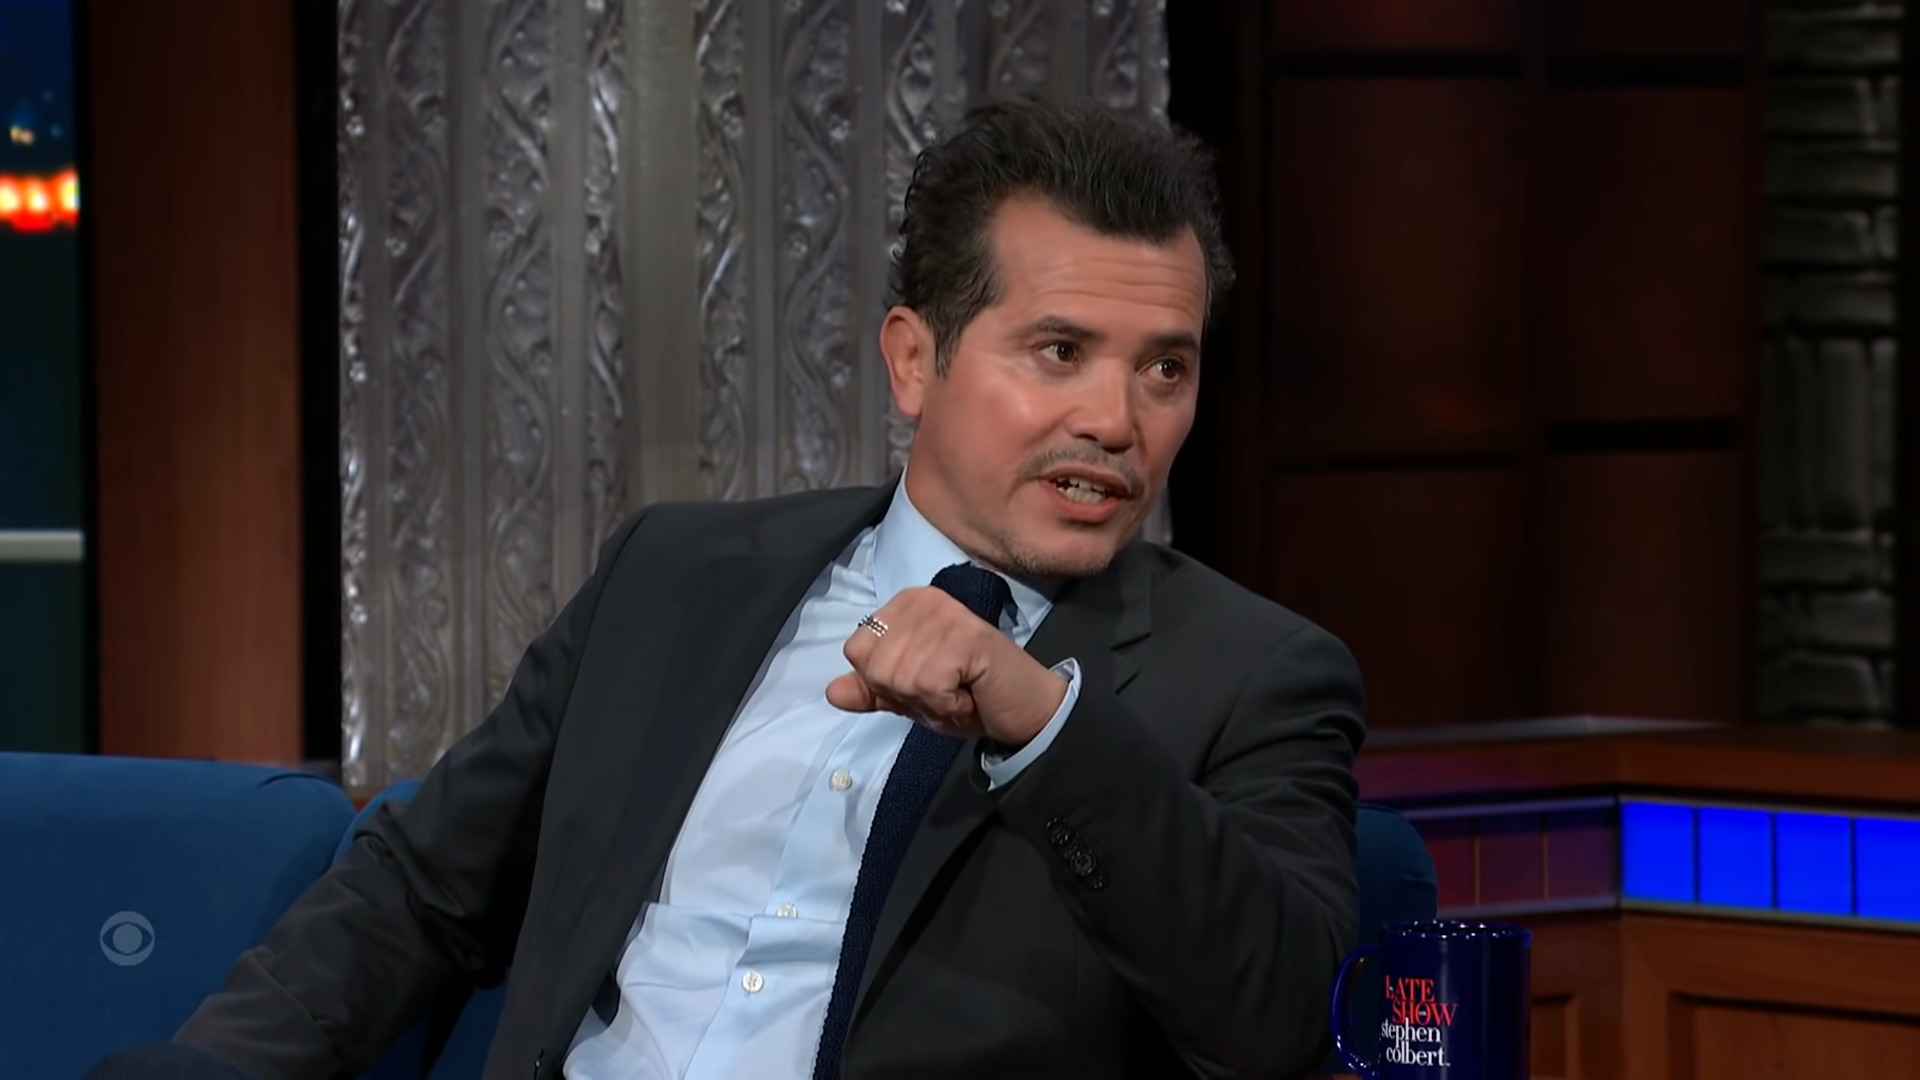 John Leguizamo stops by to have a chat with Stephen Colbert about his new comic book 'PhenomX' on The Late Show with Stephen Colbert via YouTube